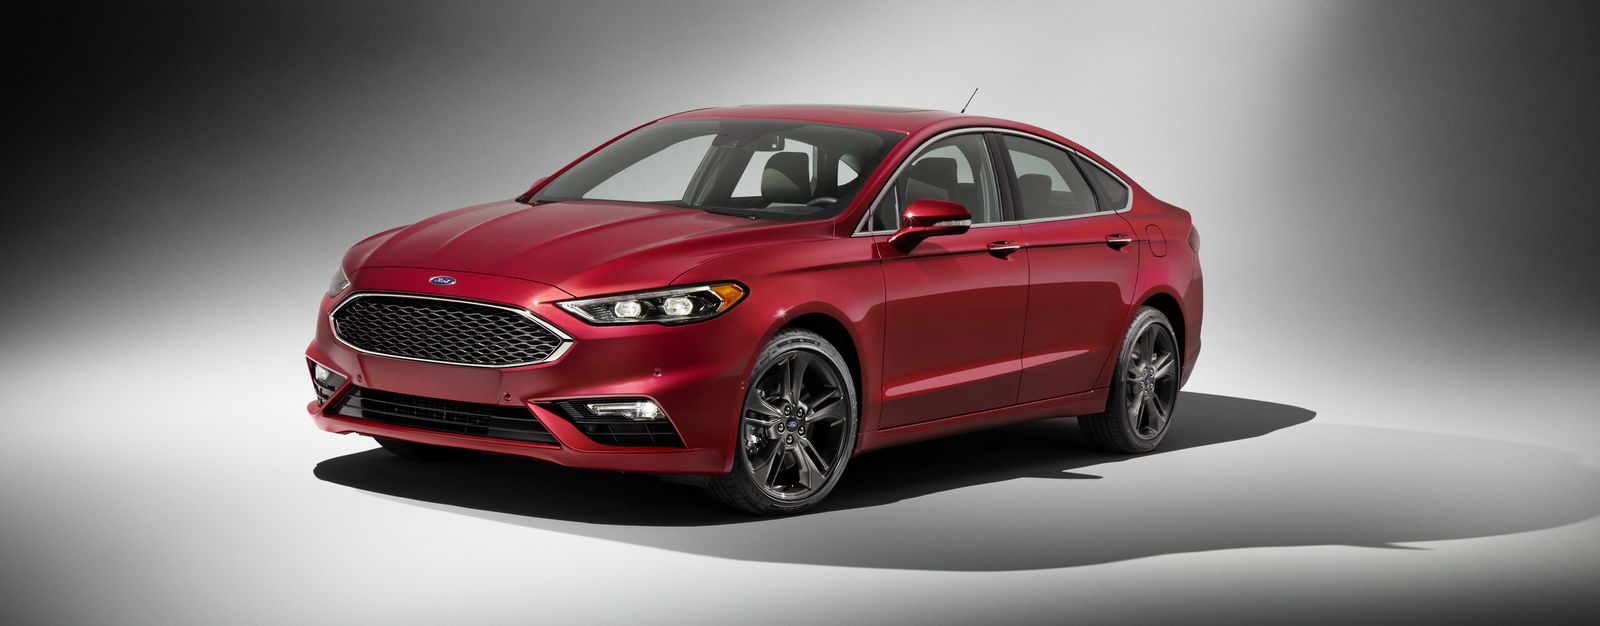 2017 Ford Fusion Sport front